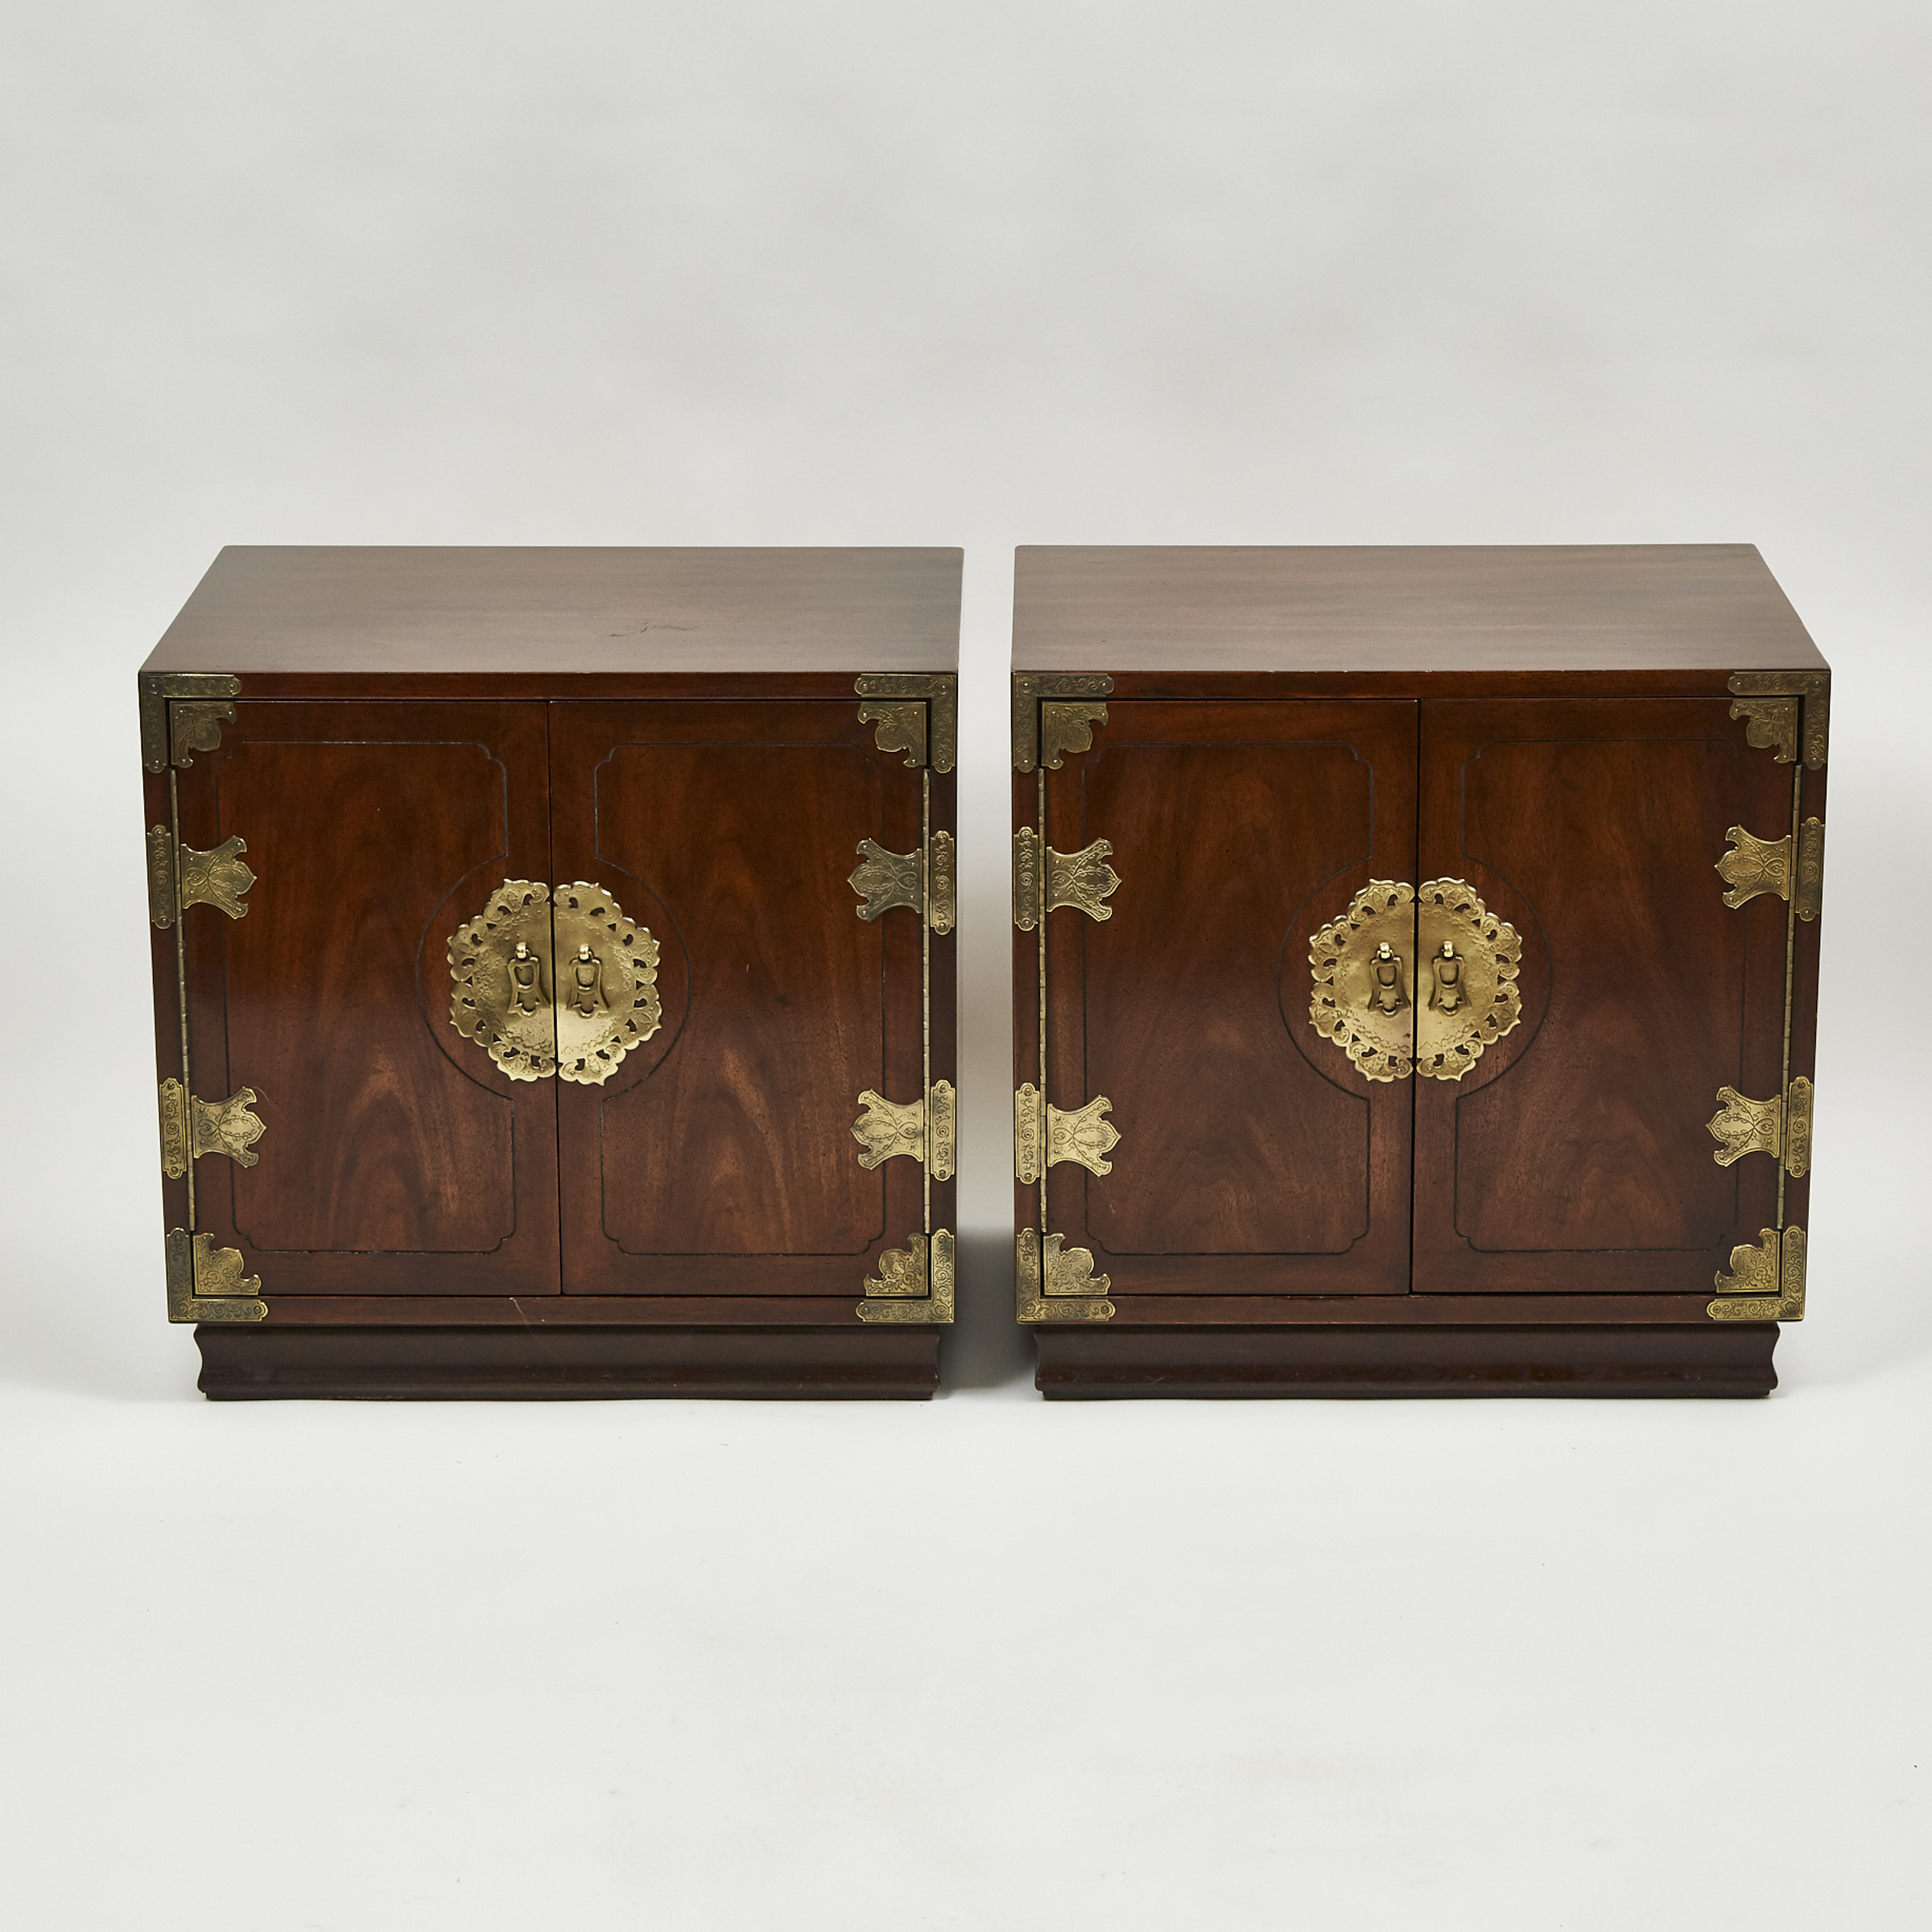 A Pair of Chinese Wooden Cupboards with Brass Hardware